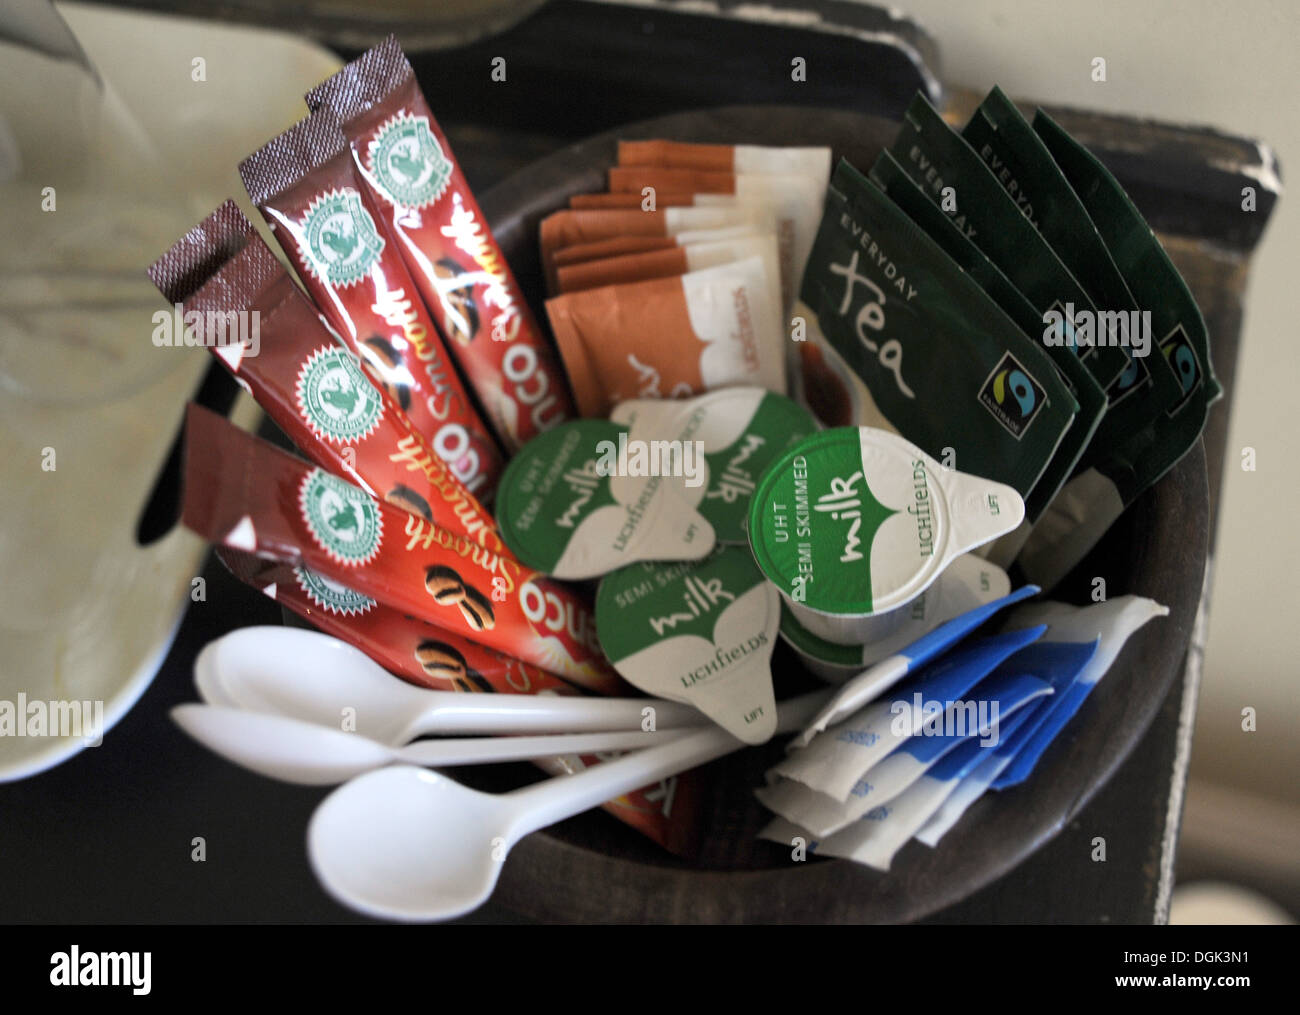 Typical hotel complimentary tea and coffee tray UK Stock Photo